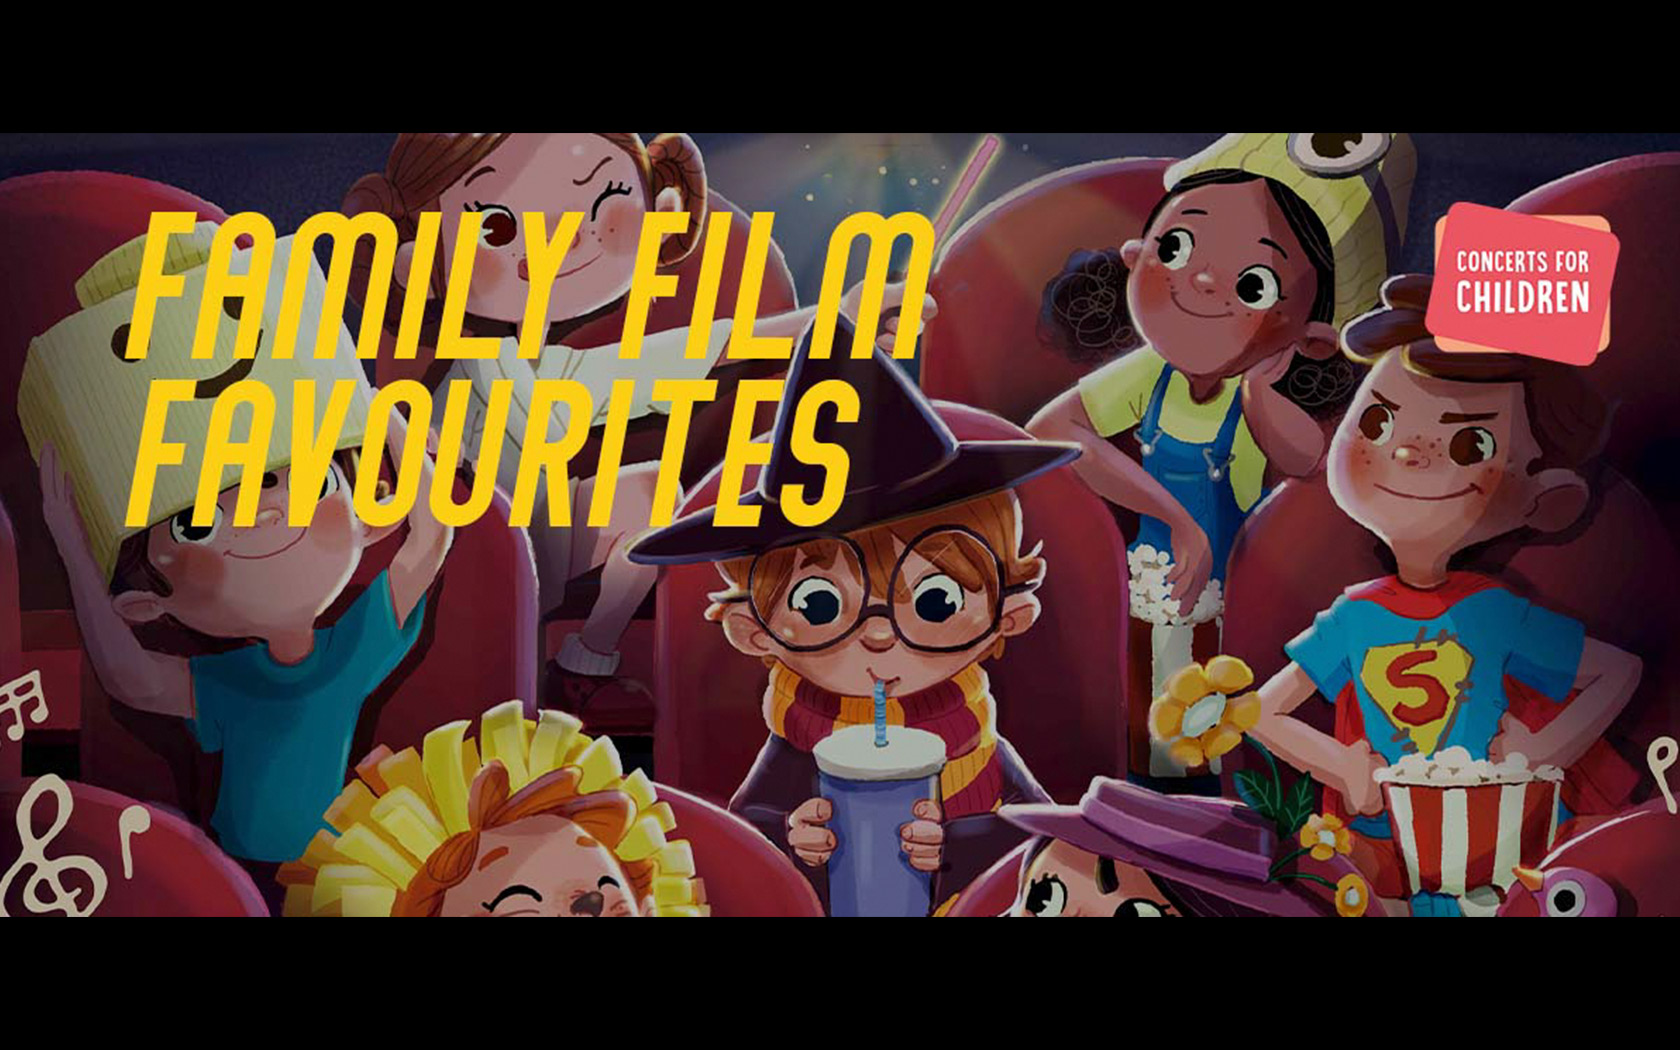 Concerts for Children: Family Film Favourites